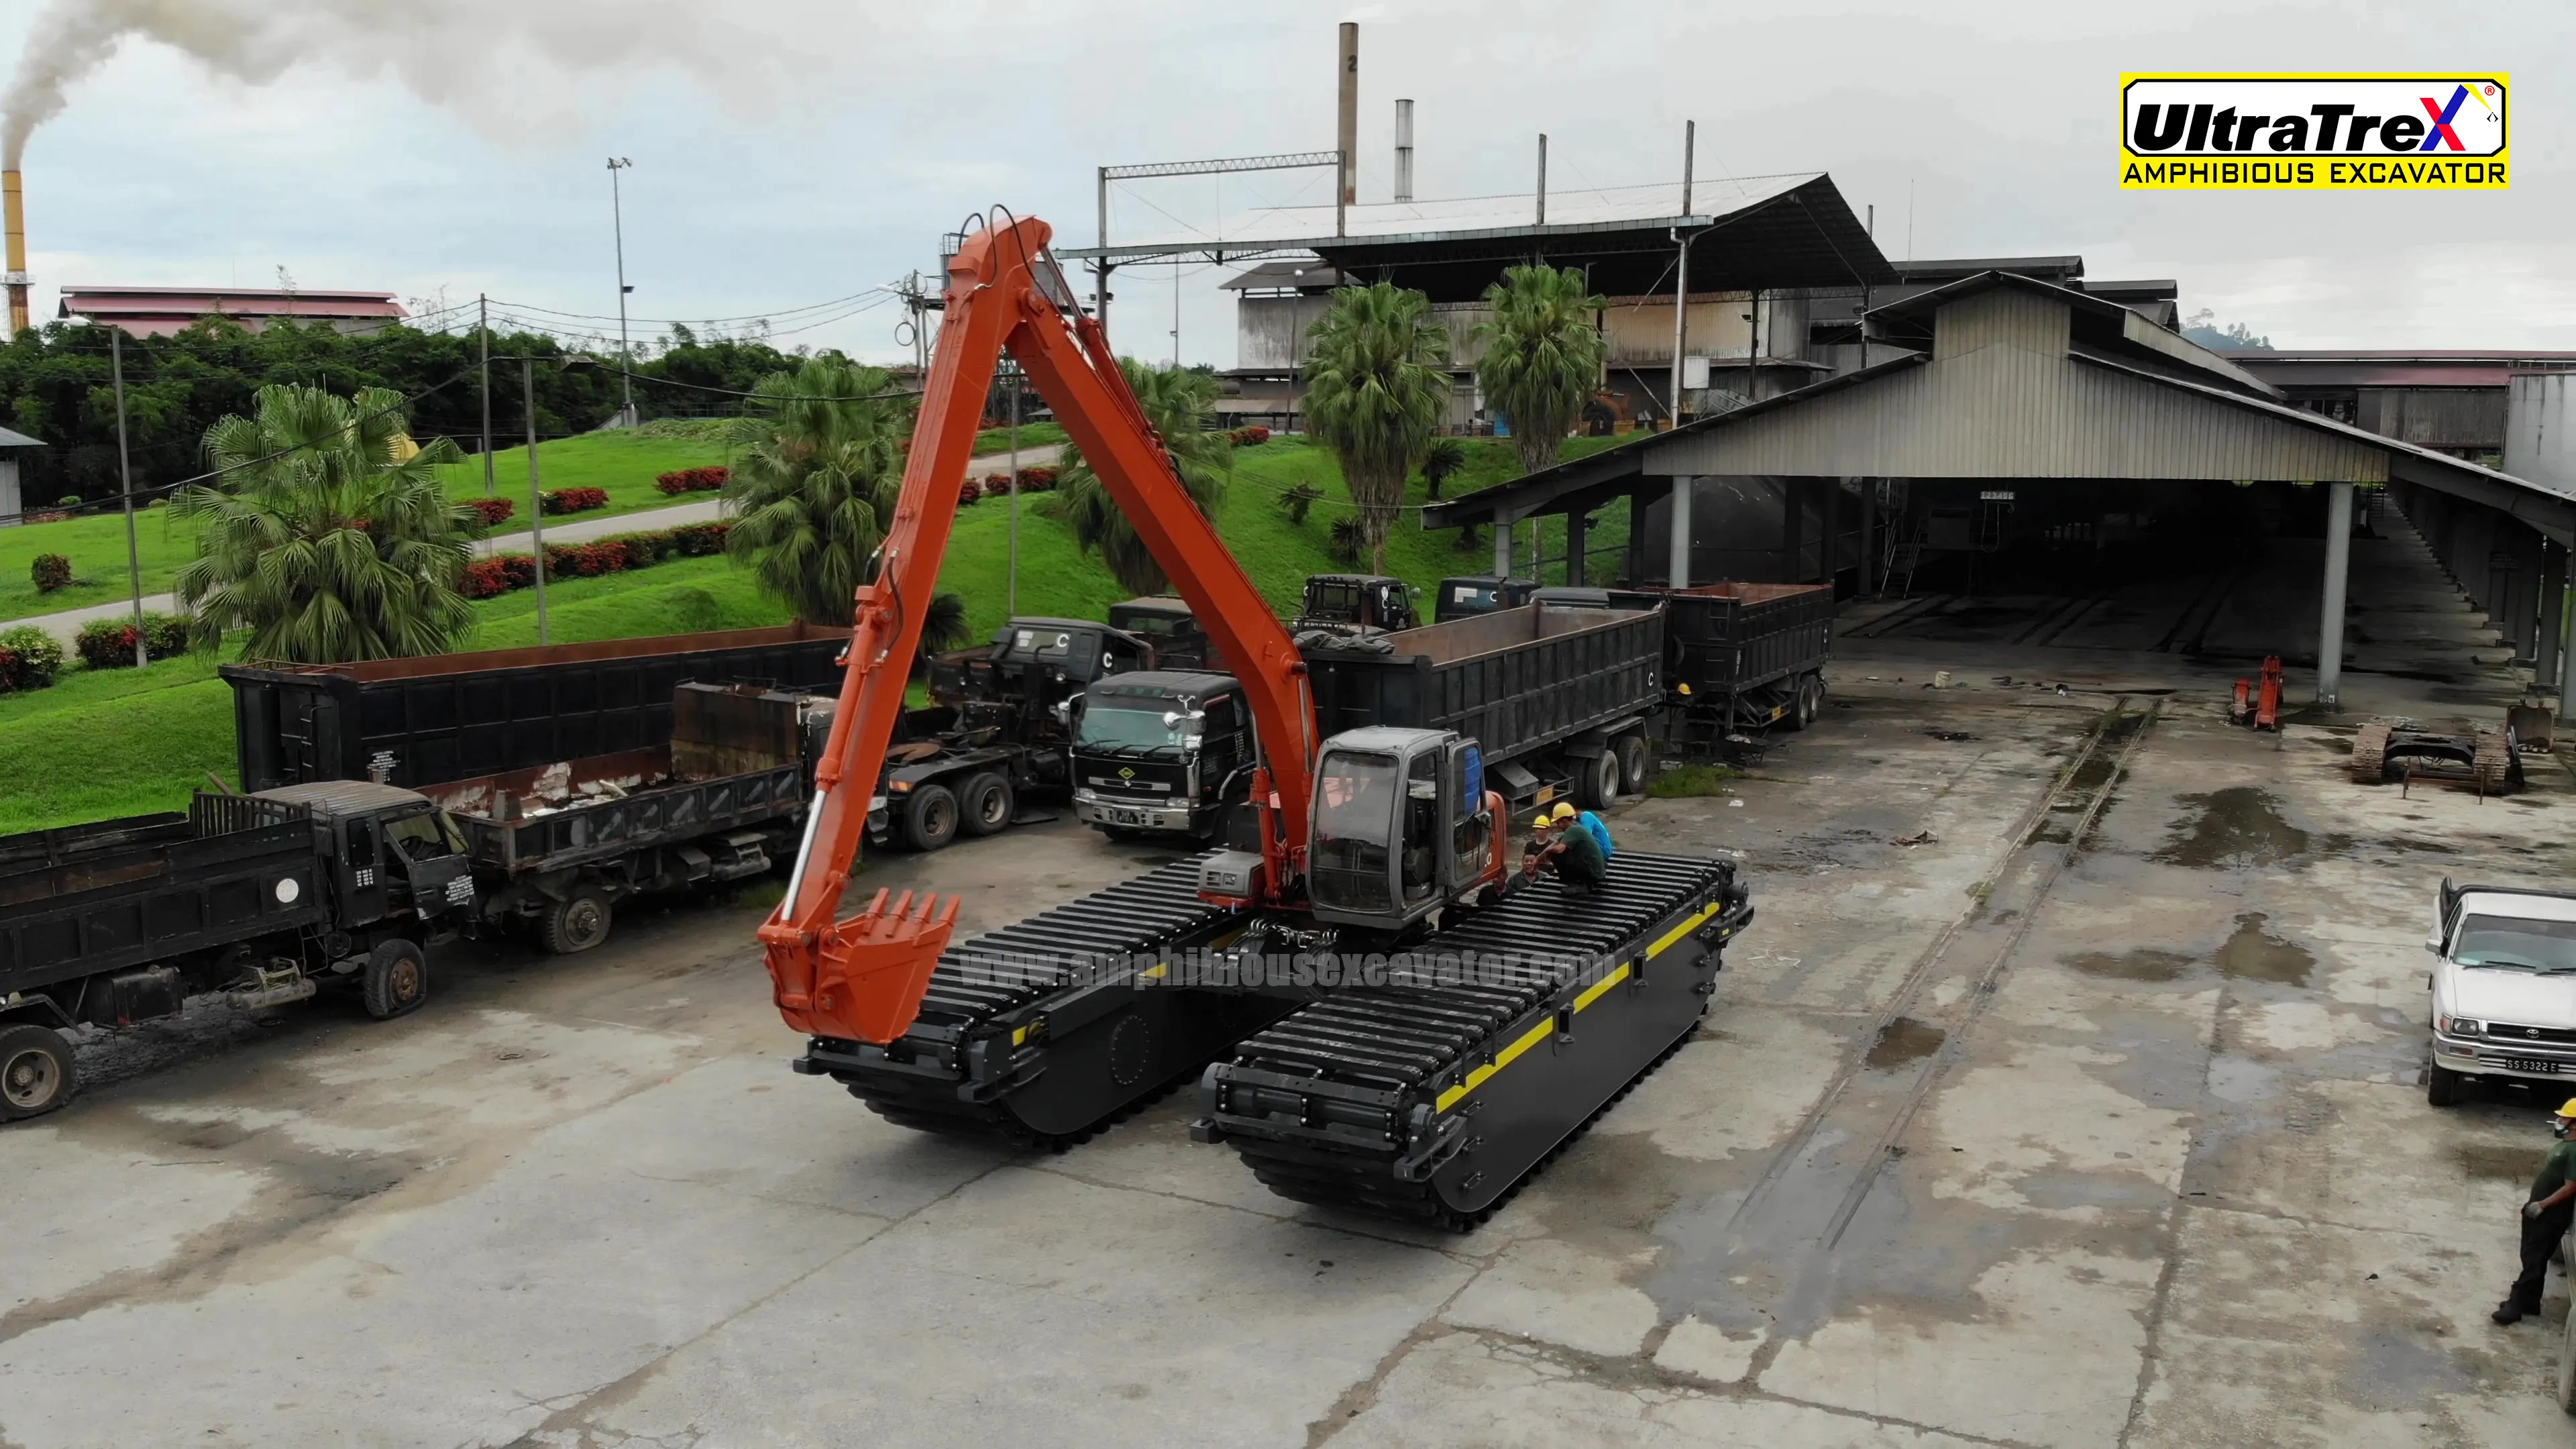 Recent installation image of Ultratrex Amphibious Undercarriage AT120ER mounted on Hitachi EX120 excavator in Malaysia.